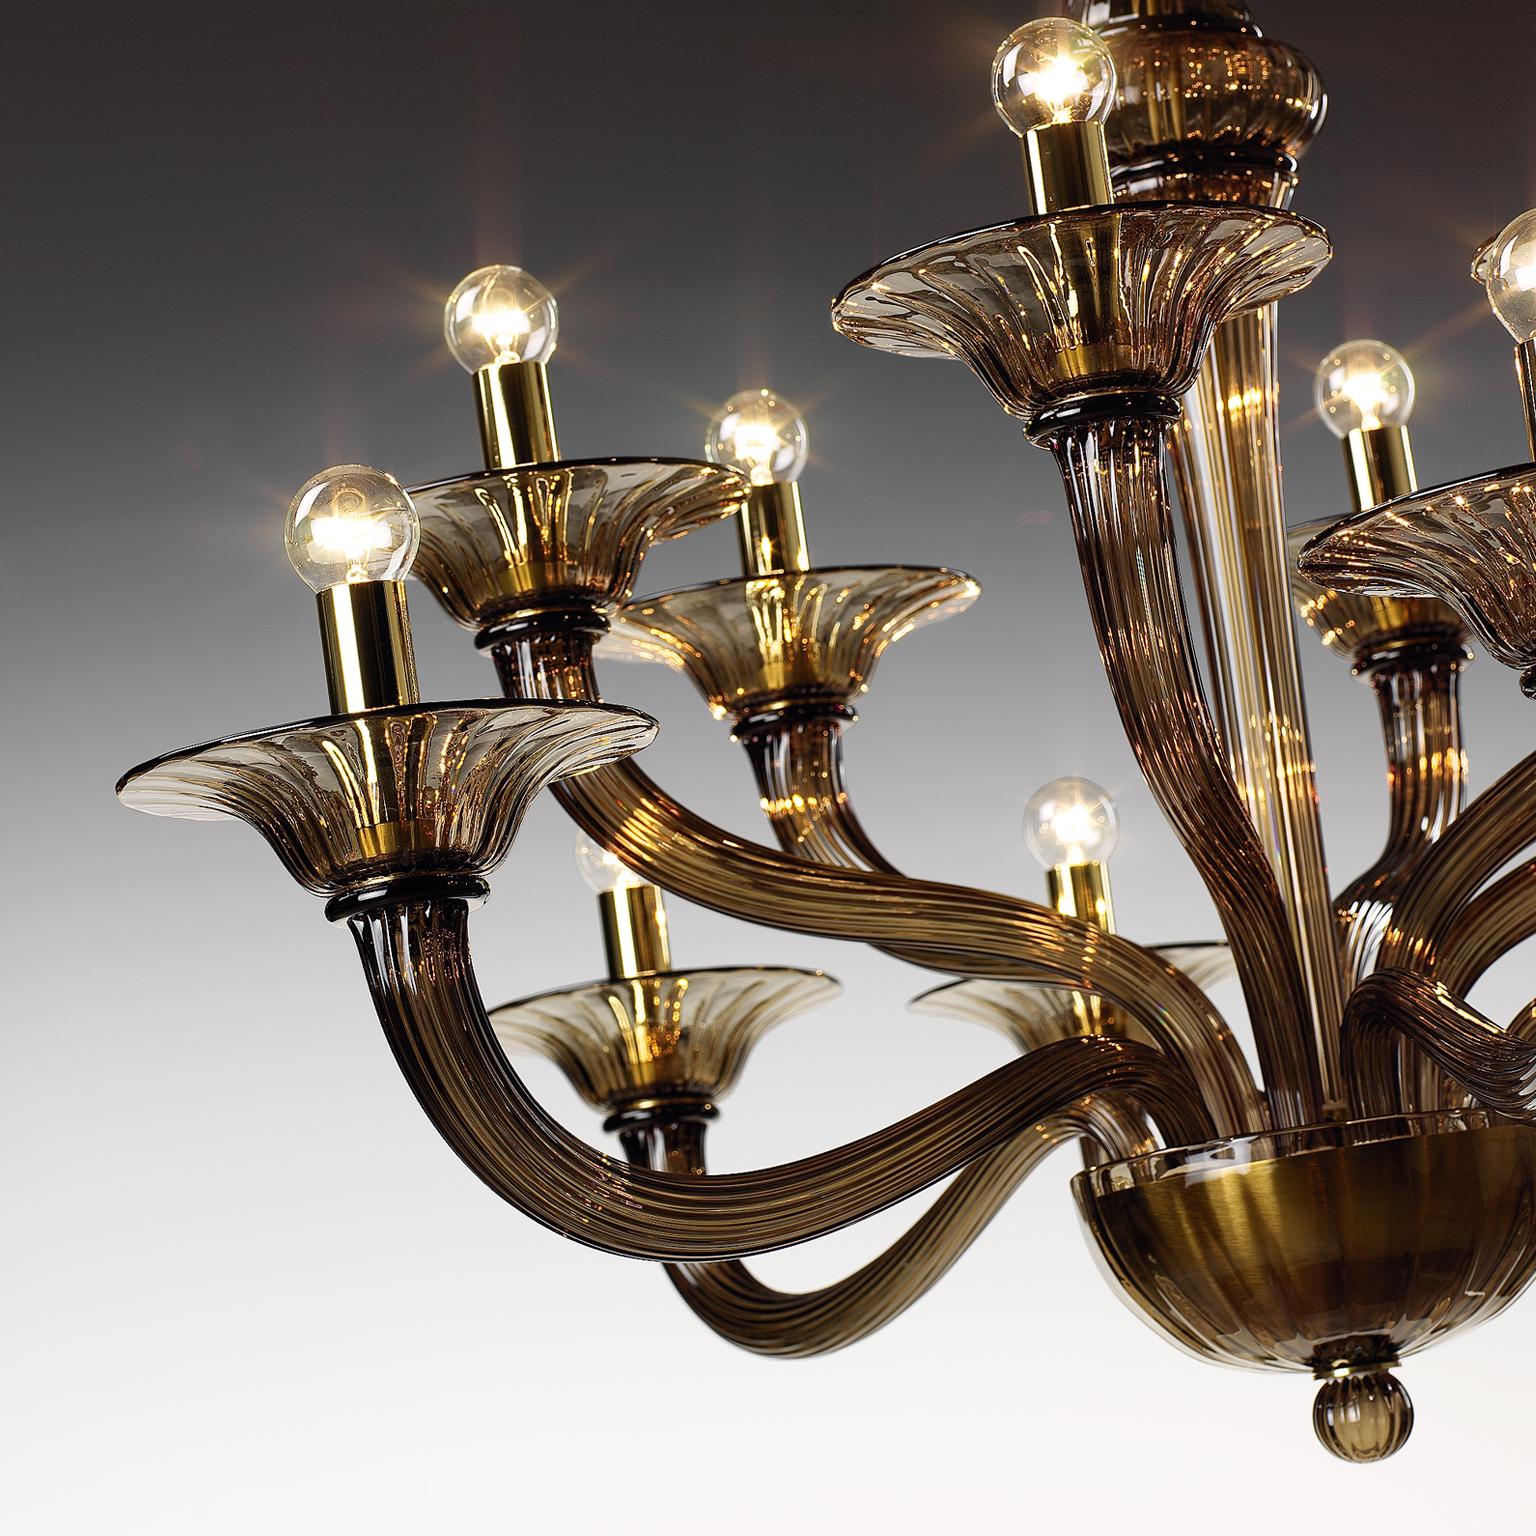 Spica Murano glass chandelier by Seguso Vetri d'Arte. Handmade, blown Murano glass chandelier in translucent brown color with 12 arms/lights.
Chain and canopy are included to extend the height.
This is a showroom sample and the price is reduced